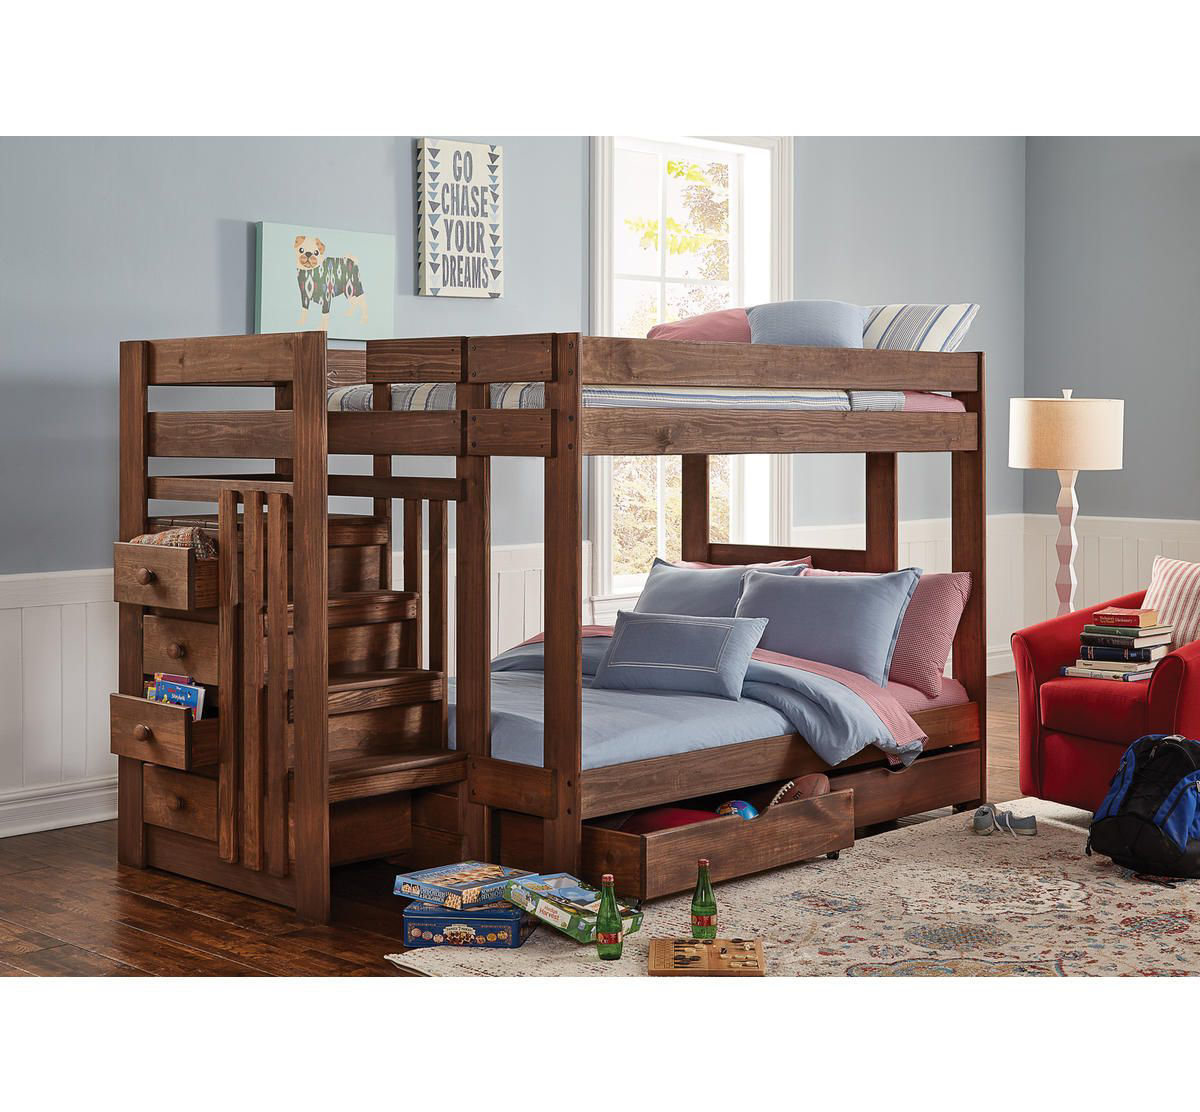 Baylee Full Stairbed Bad Home, Bunk Beds For Kids Full Over Full